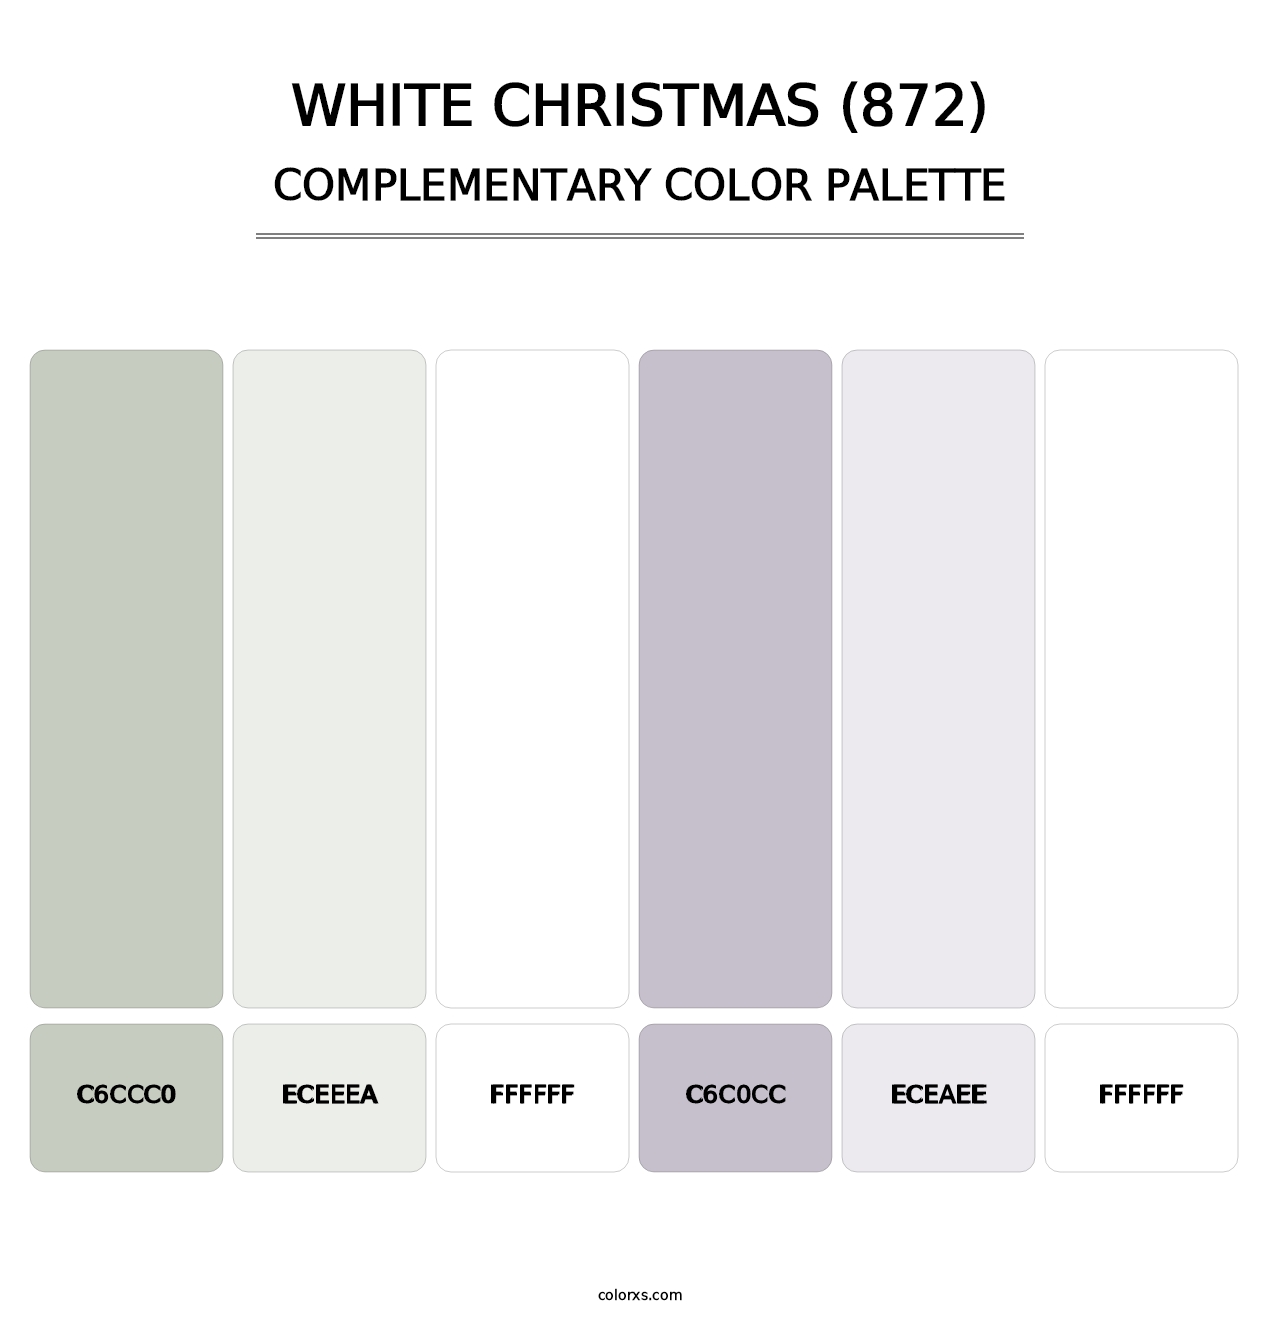 White Christmas (872) - Complementary Color Palette